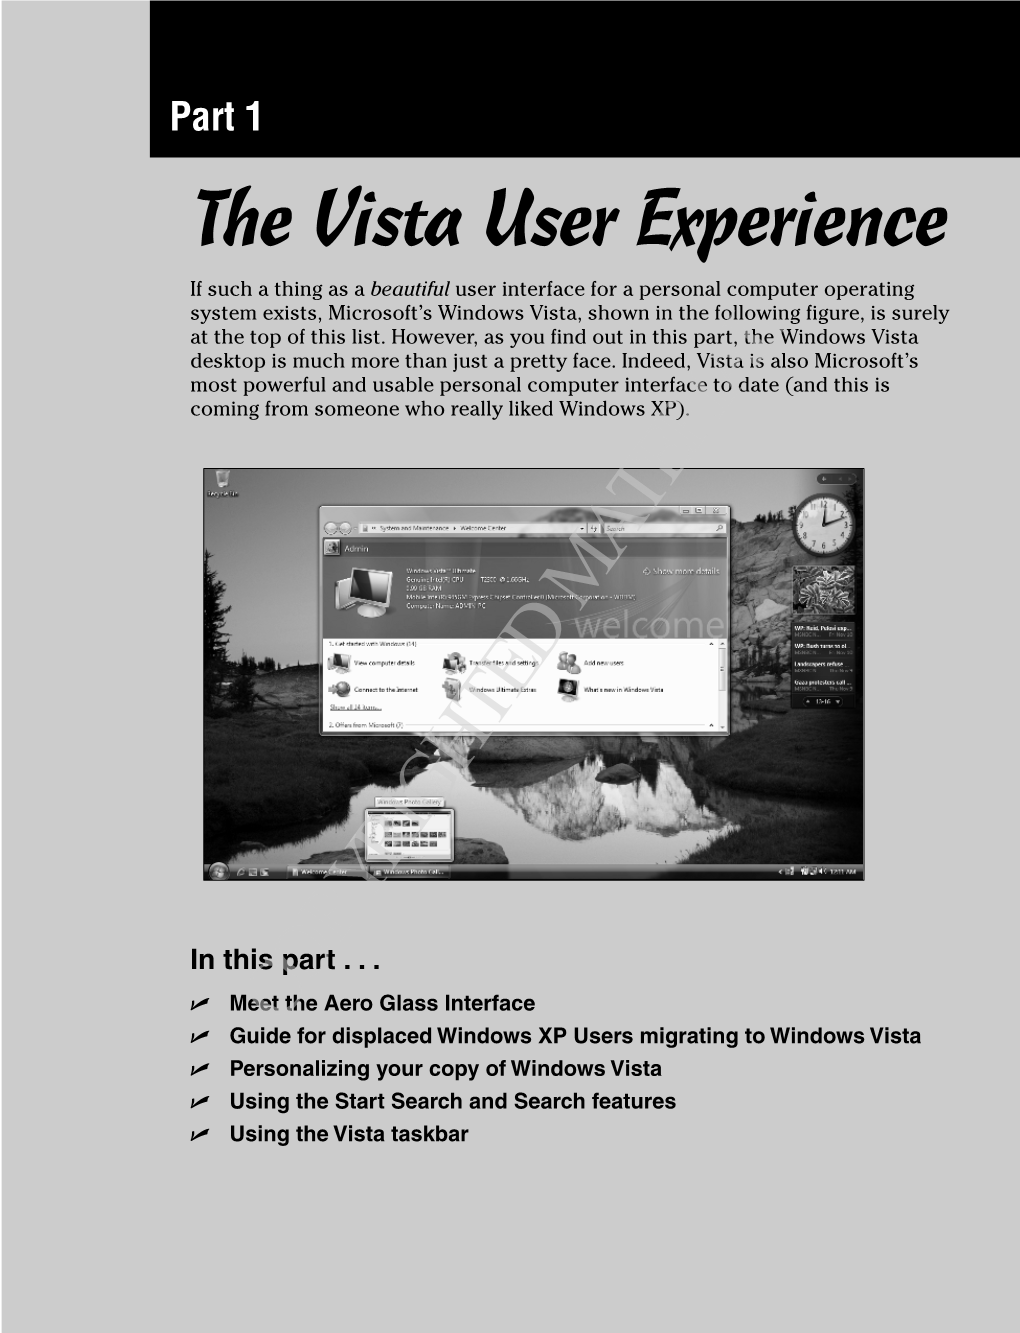 The Vista User Experience